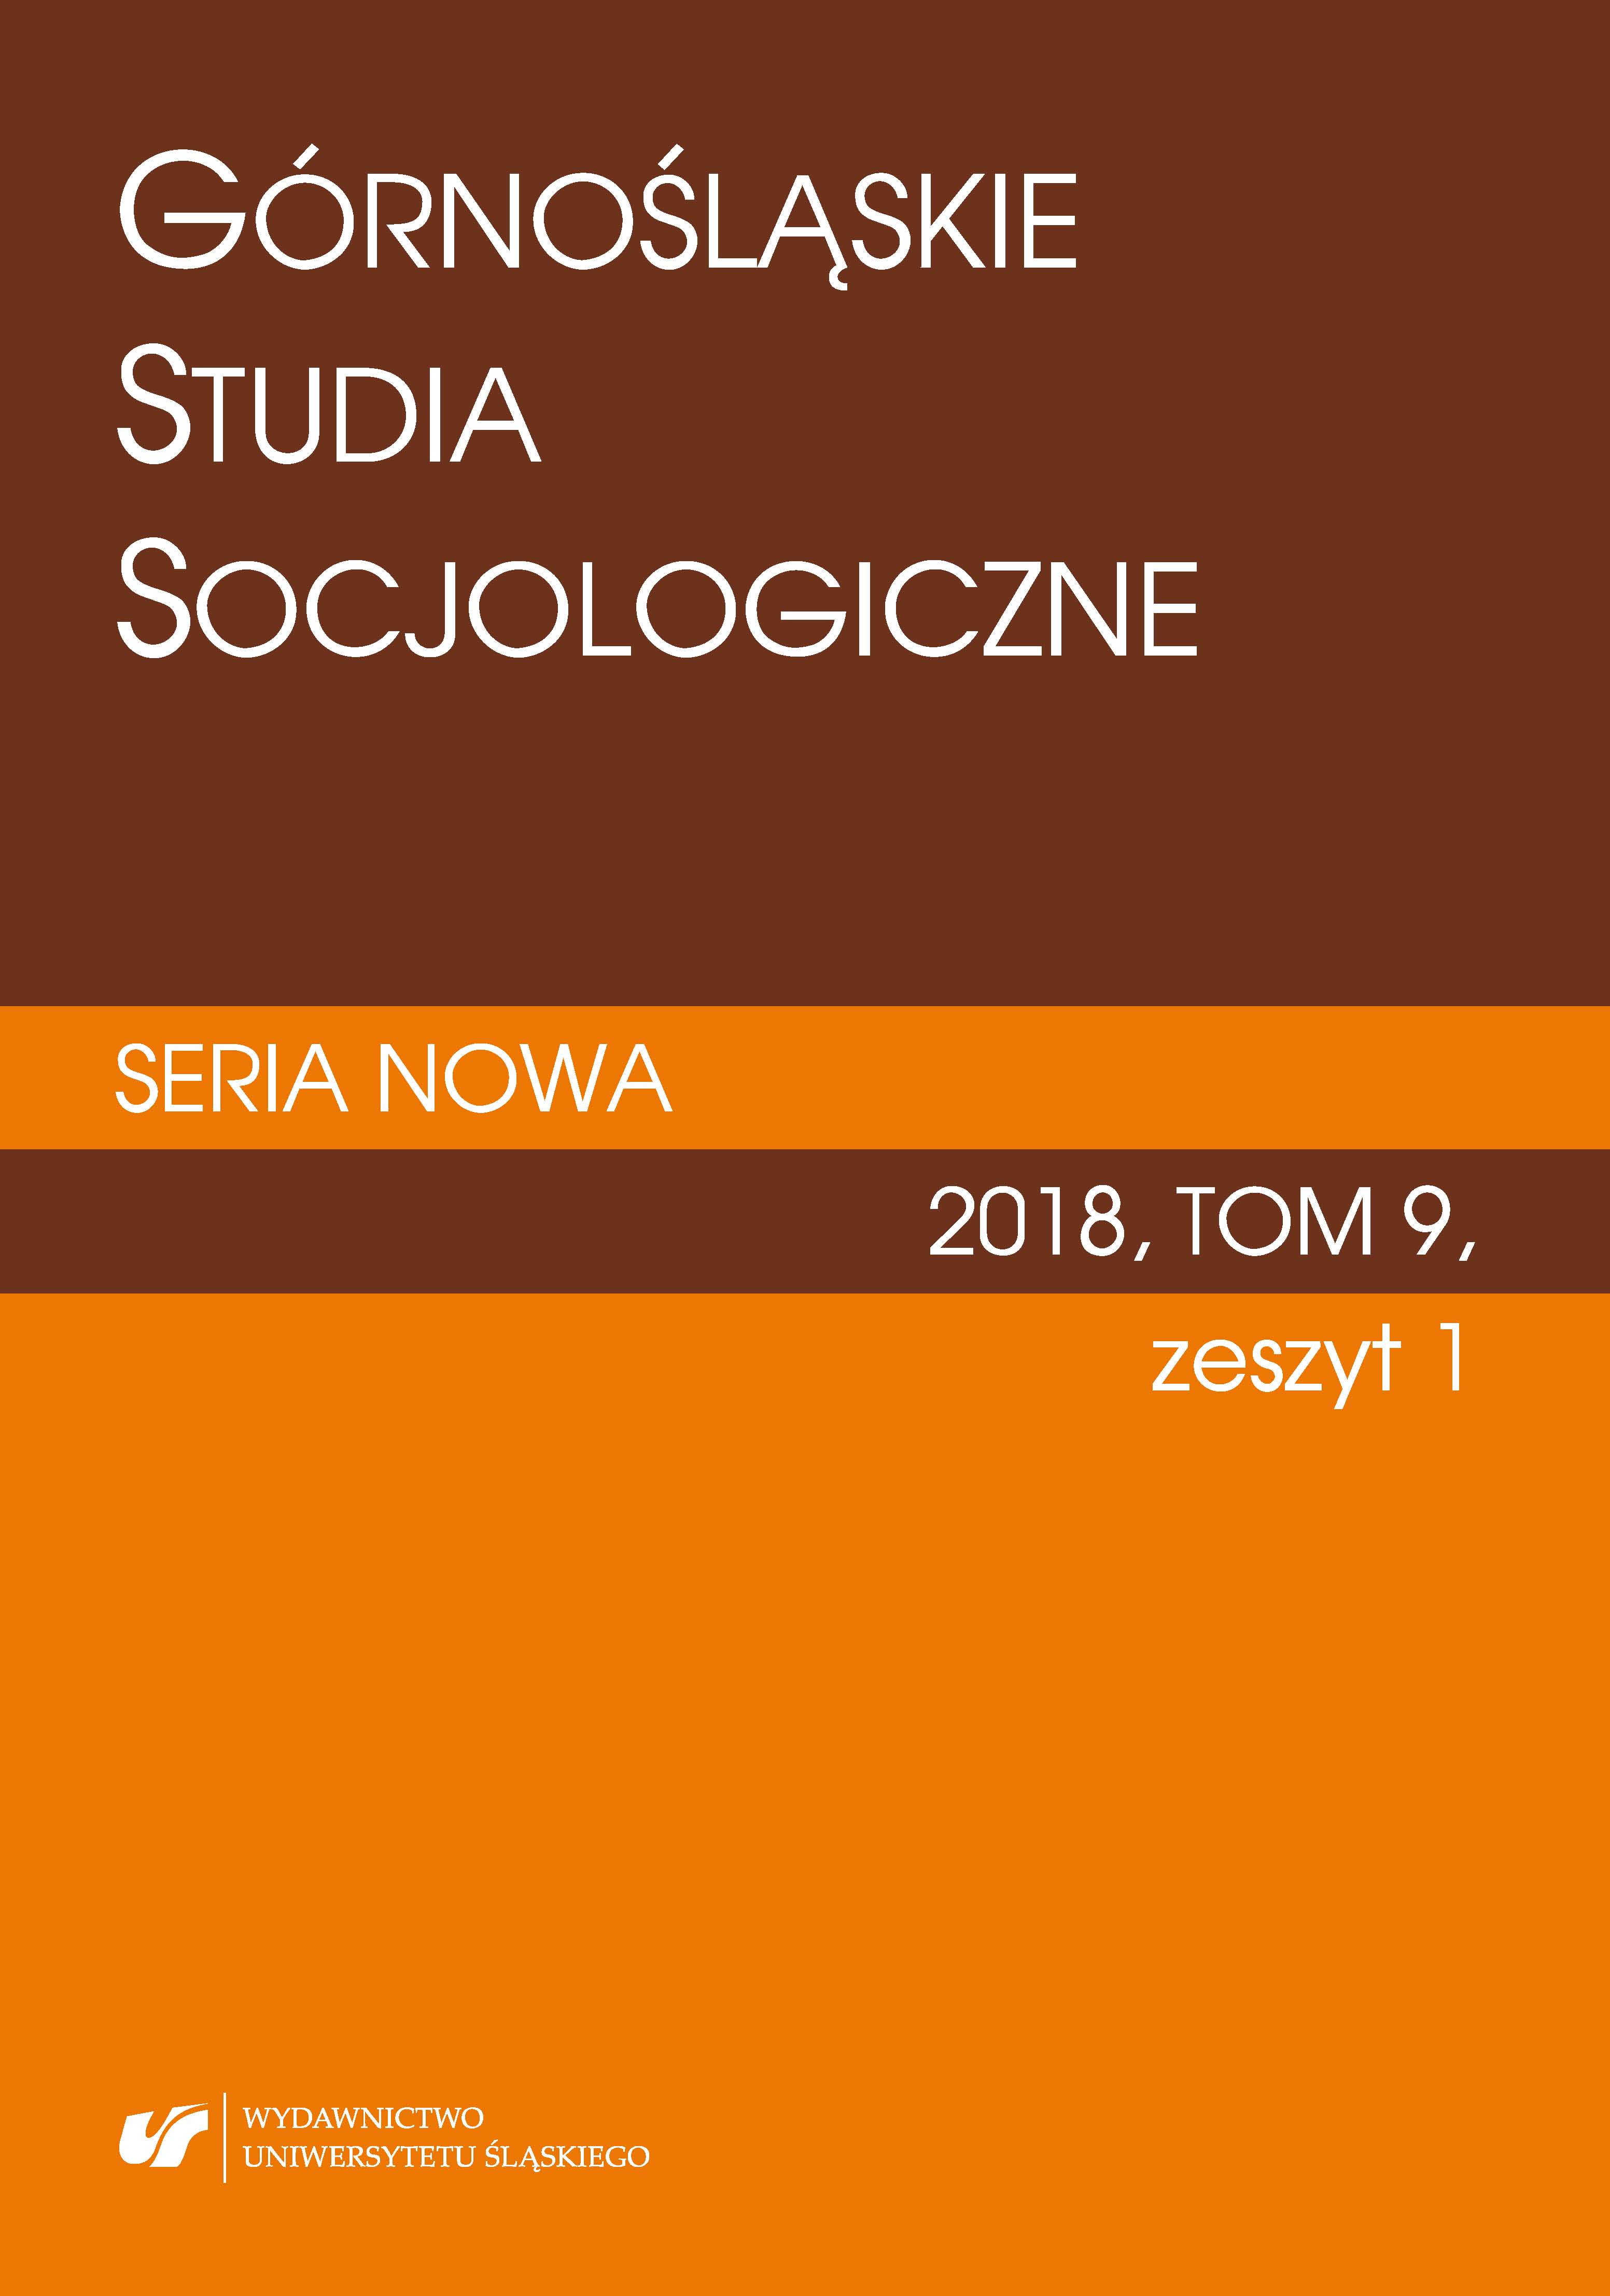 Interests, Professional Career or ....? Reasons for the Choice of the Field of Study Given by Students of the Institute of Sociology at the University of Wrocław Cover Image